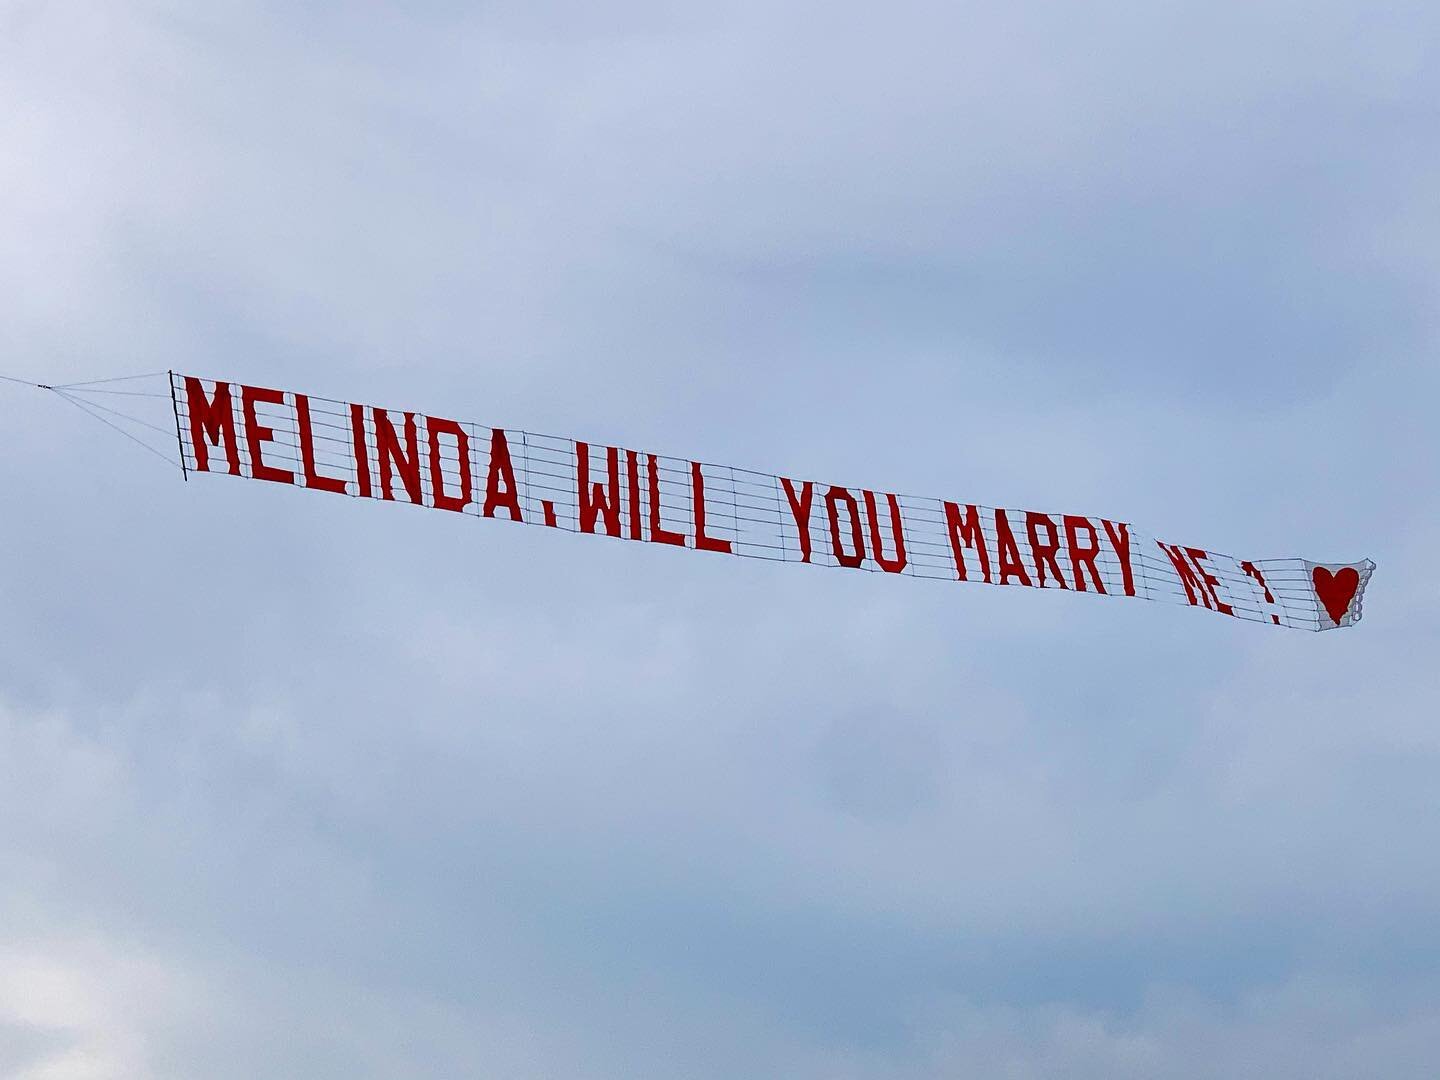 We&rsquo;ve been going the extra mile for our customers since 1979. When you book a marriage proposal with us we arrive on location and on time, every time. 
.
.
#Aerialadvertising #airads #Aerialbanner #airplanebanner #marriageproposal #proposalidea